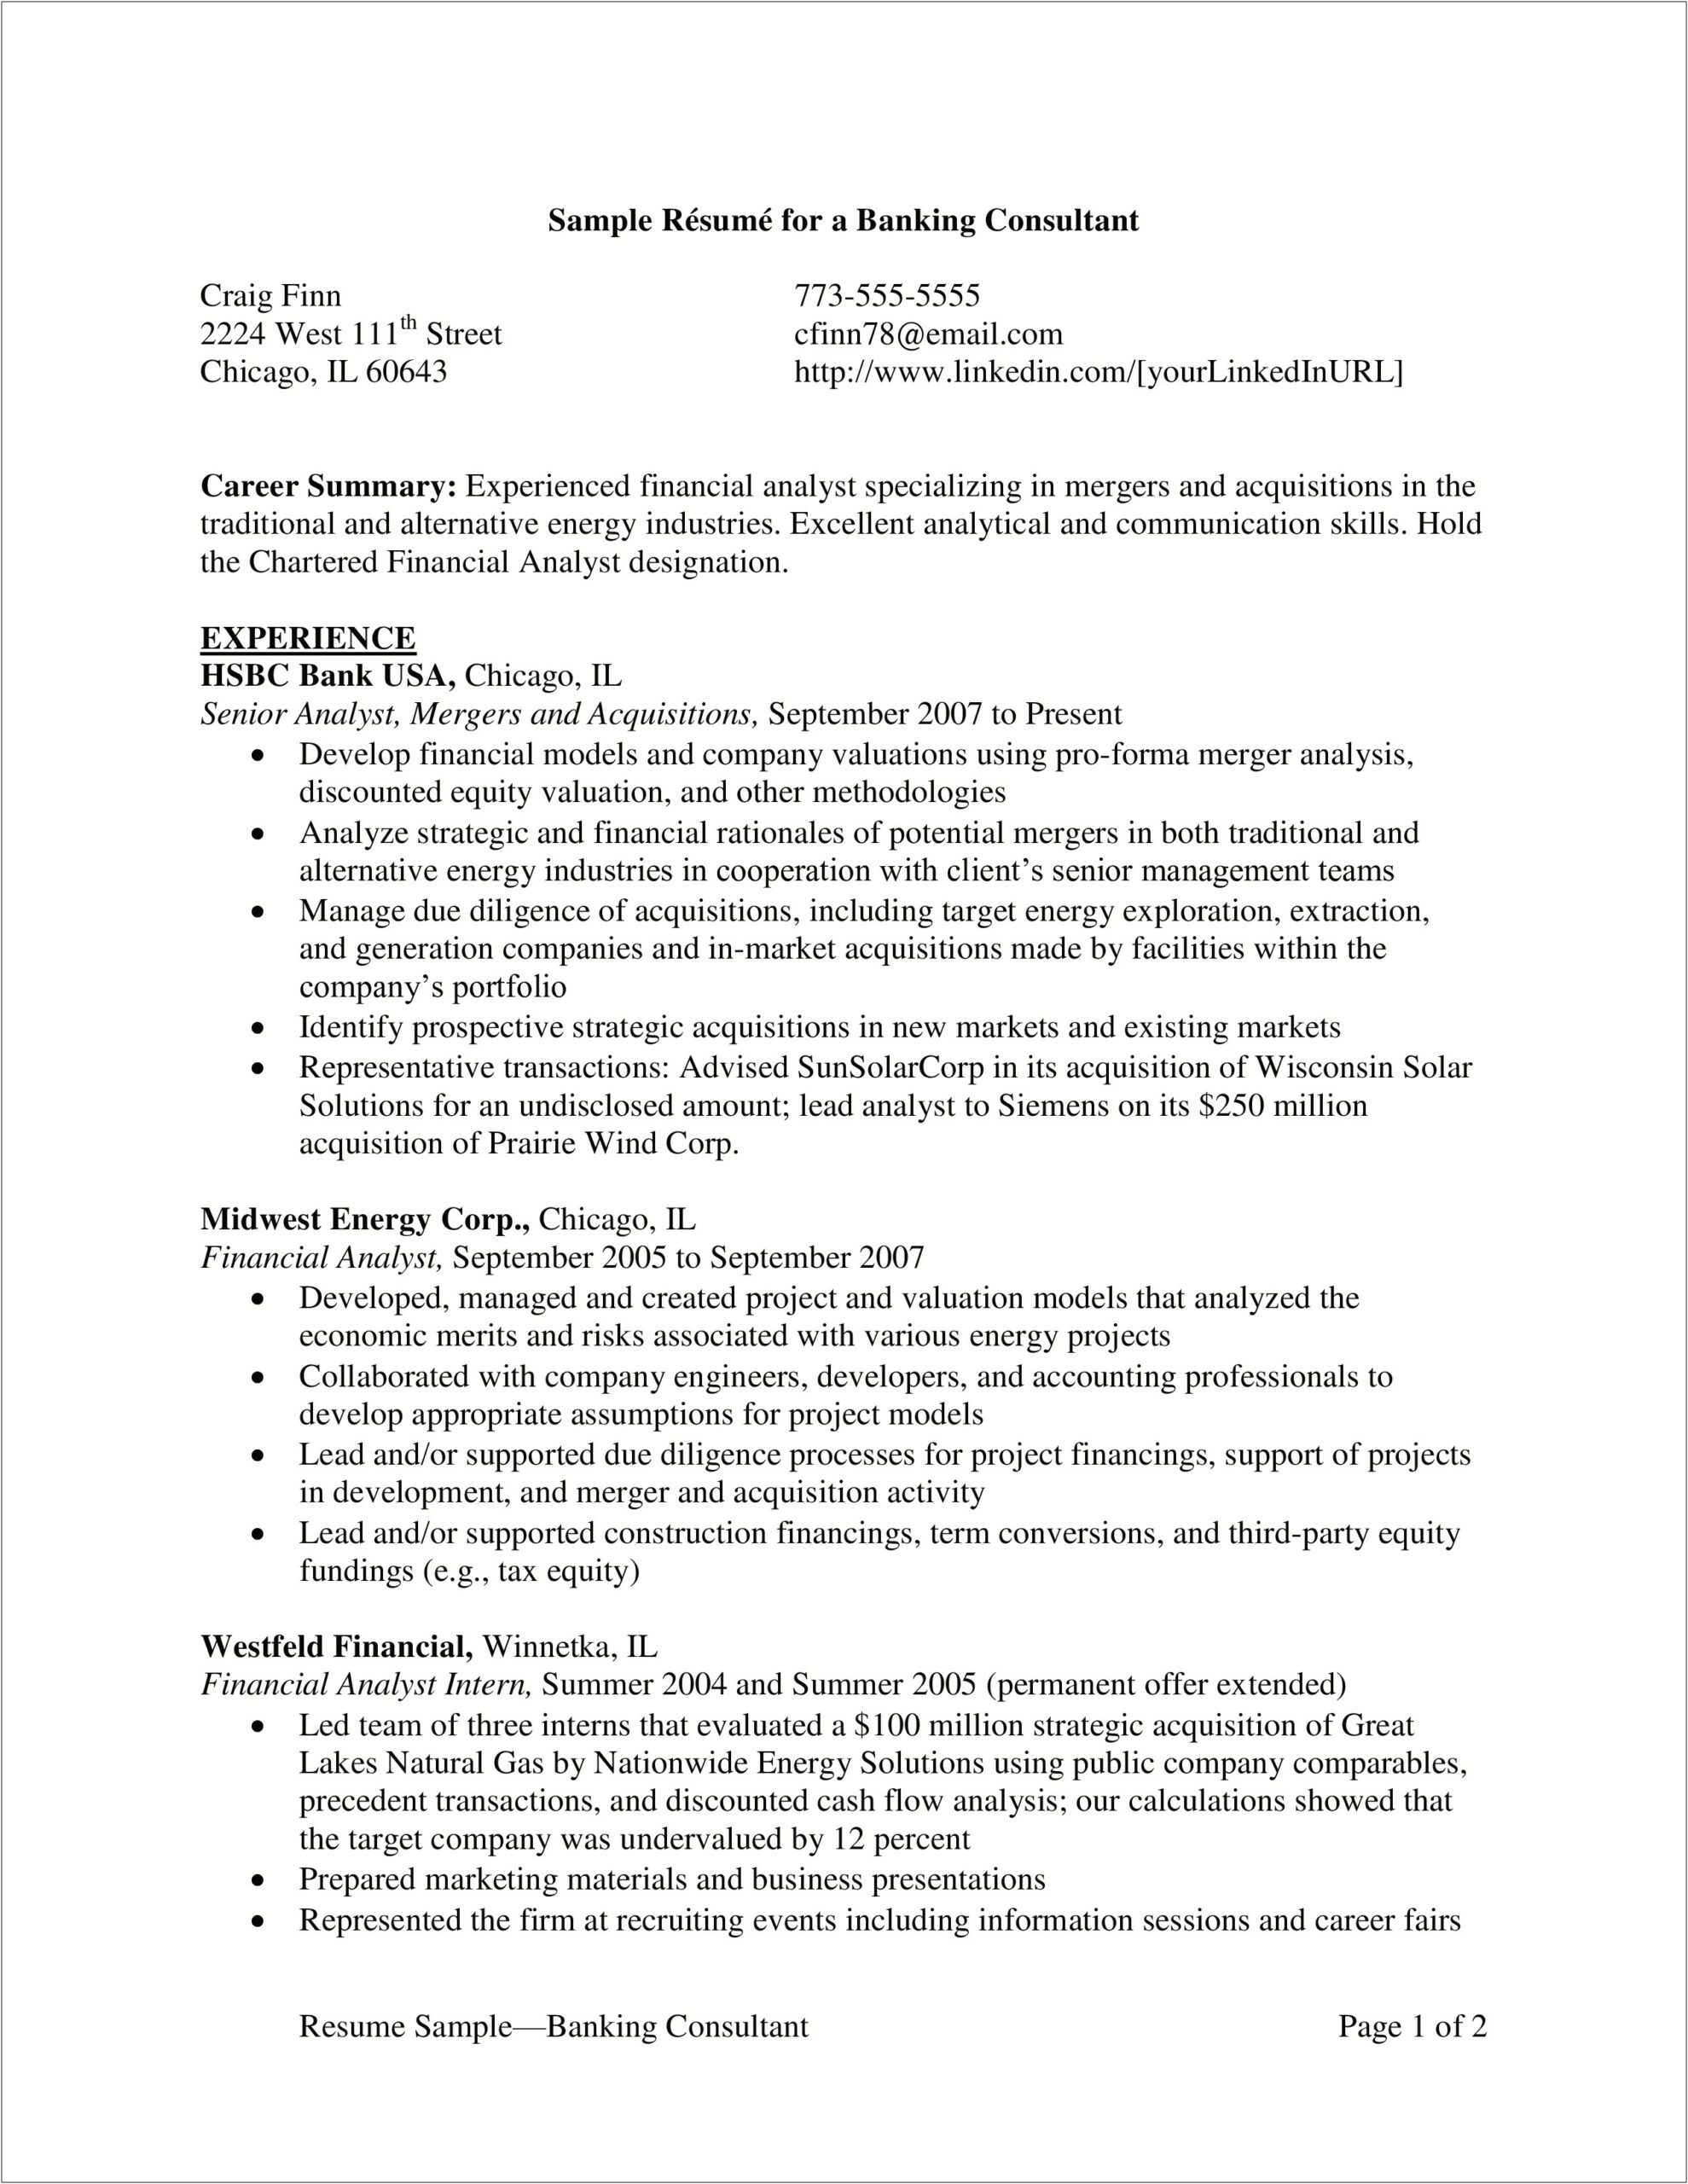 Sample Resume For Experienced Banking Professional